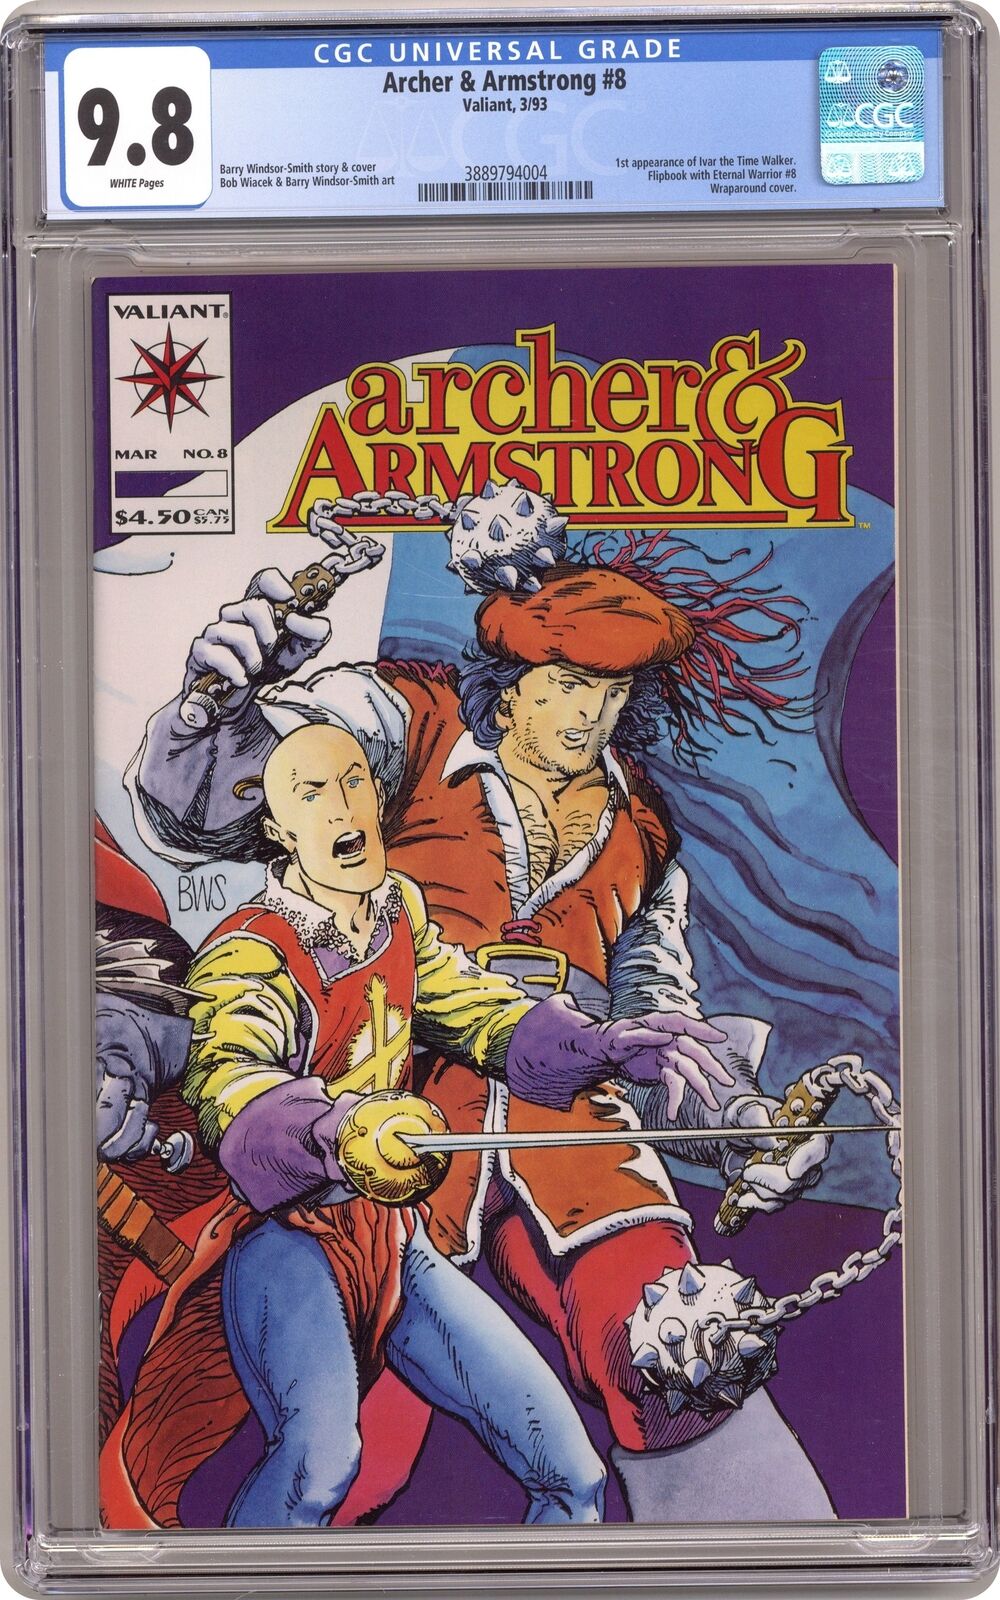 Archer and Armstrong #8 CGC 9.8 1993 3889794004